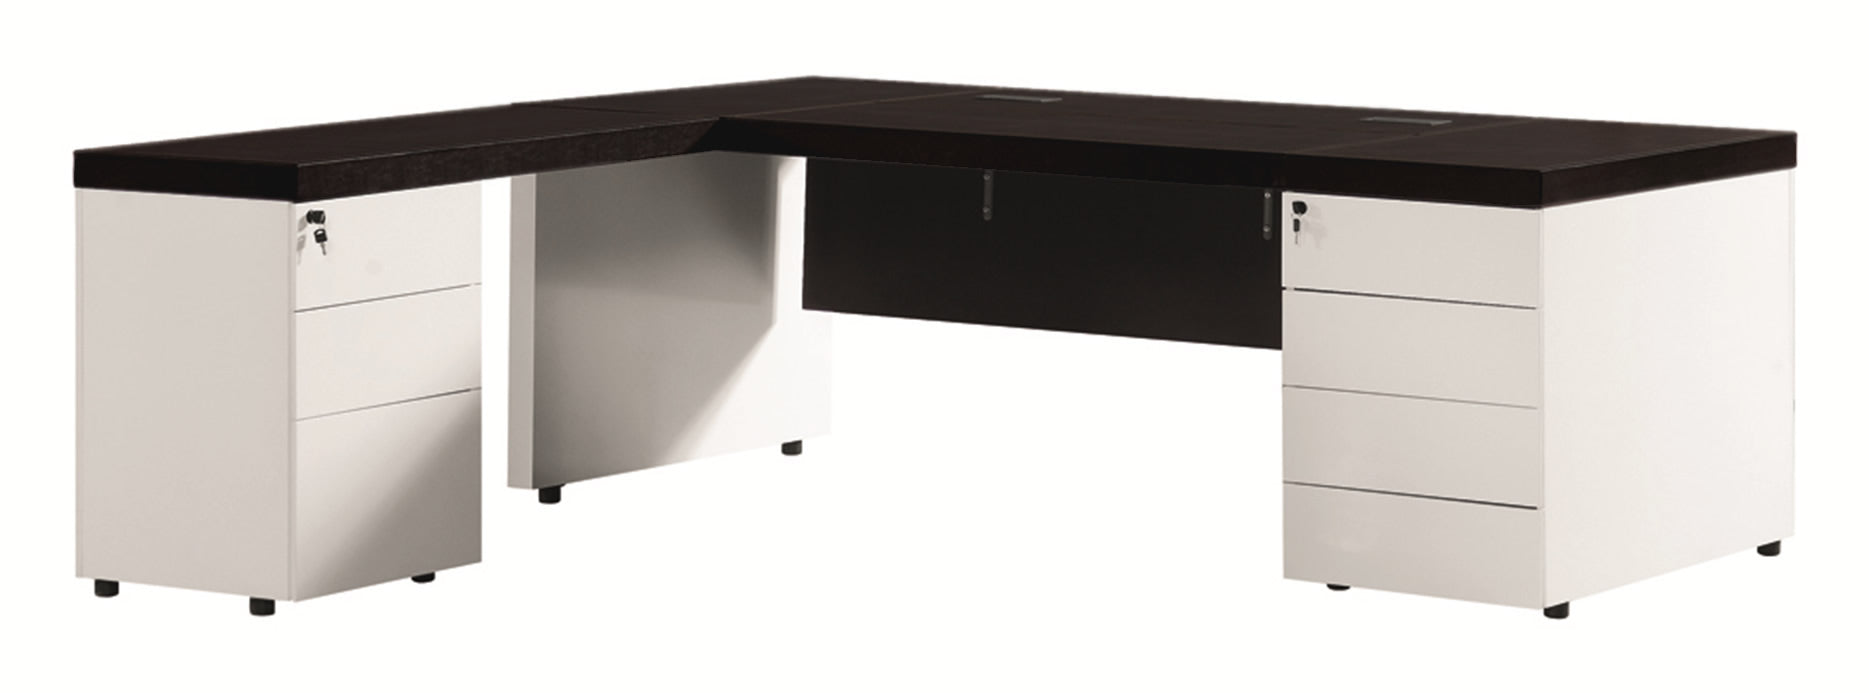 White High Gloss L Shape Executive Desk with Black Bonded Leather Top - T1361-2000mm UK